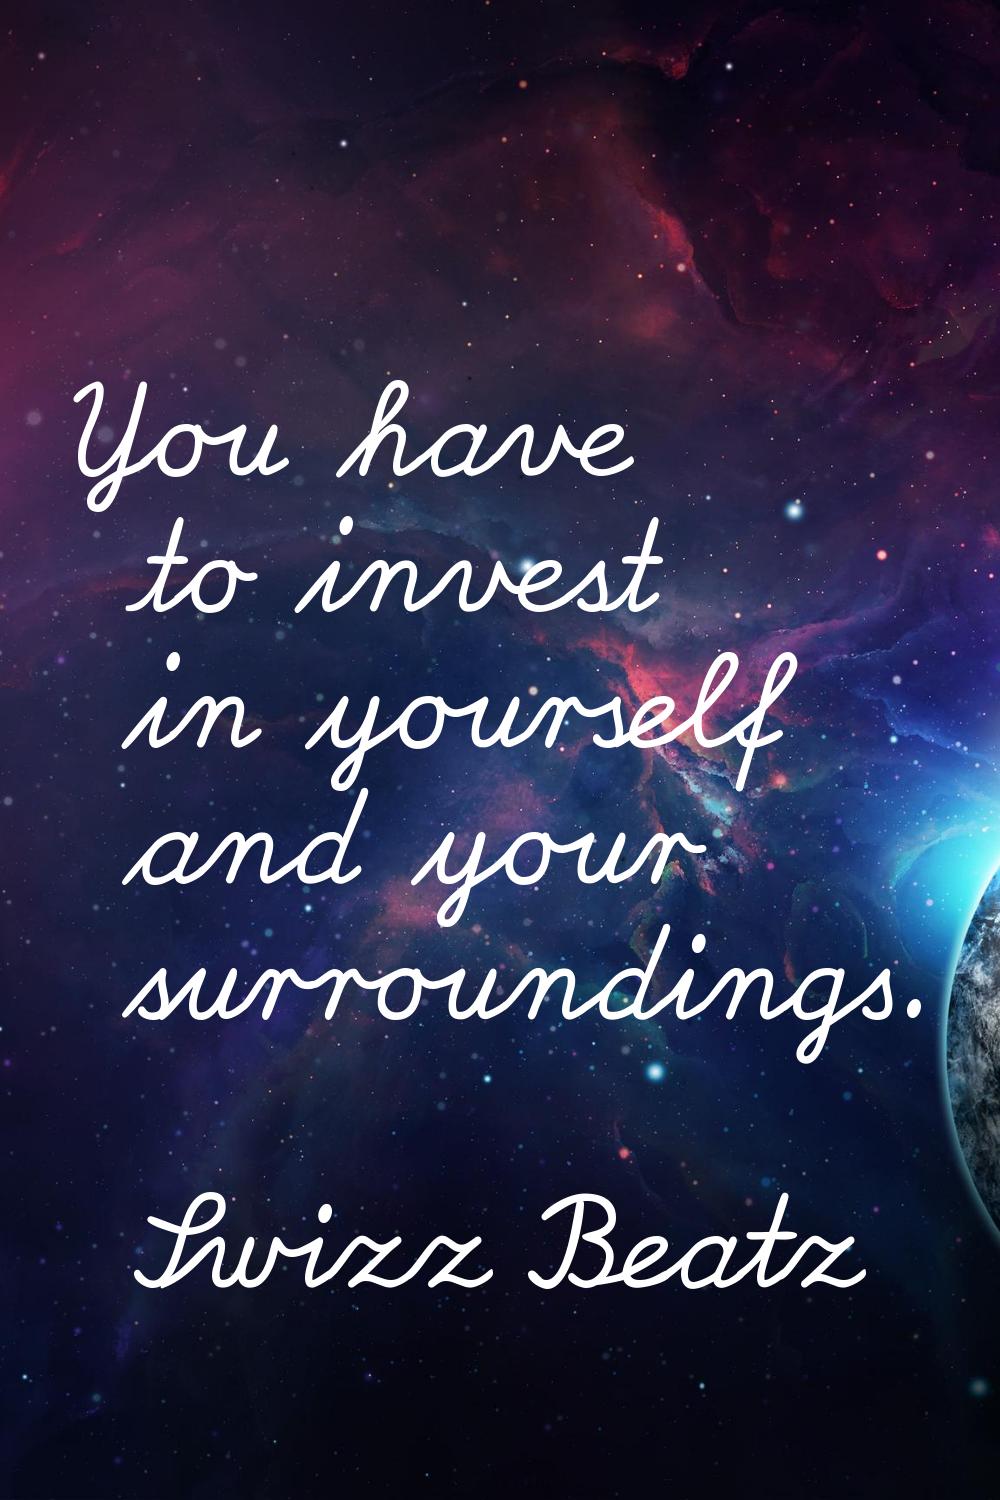 You have to invest in yourself and your surroundings.